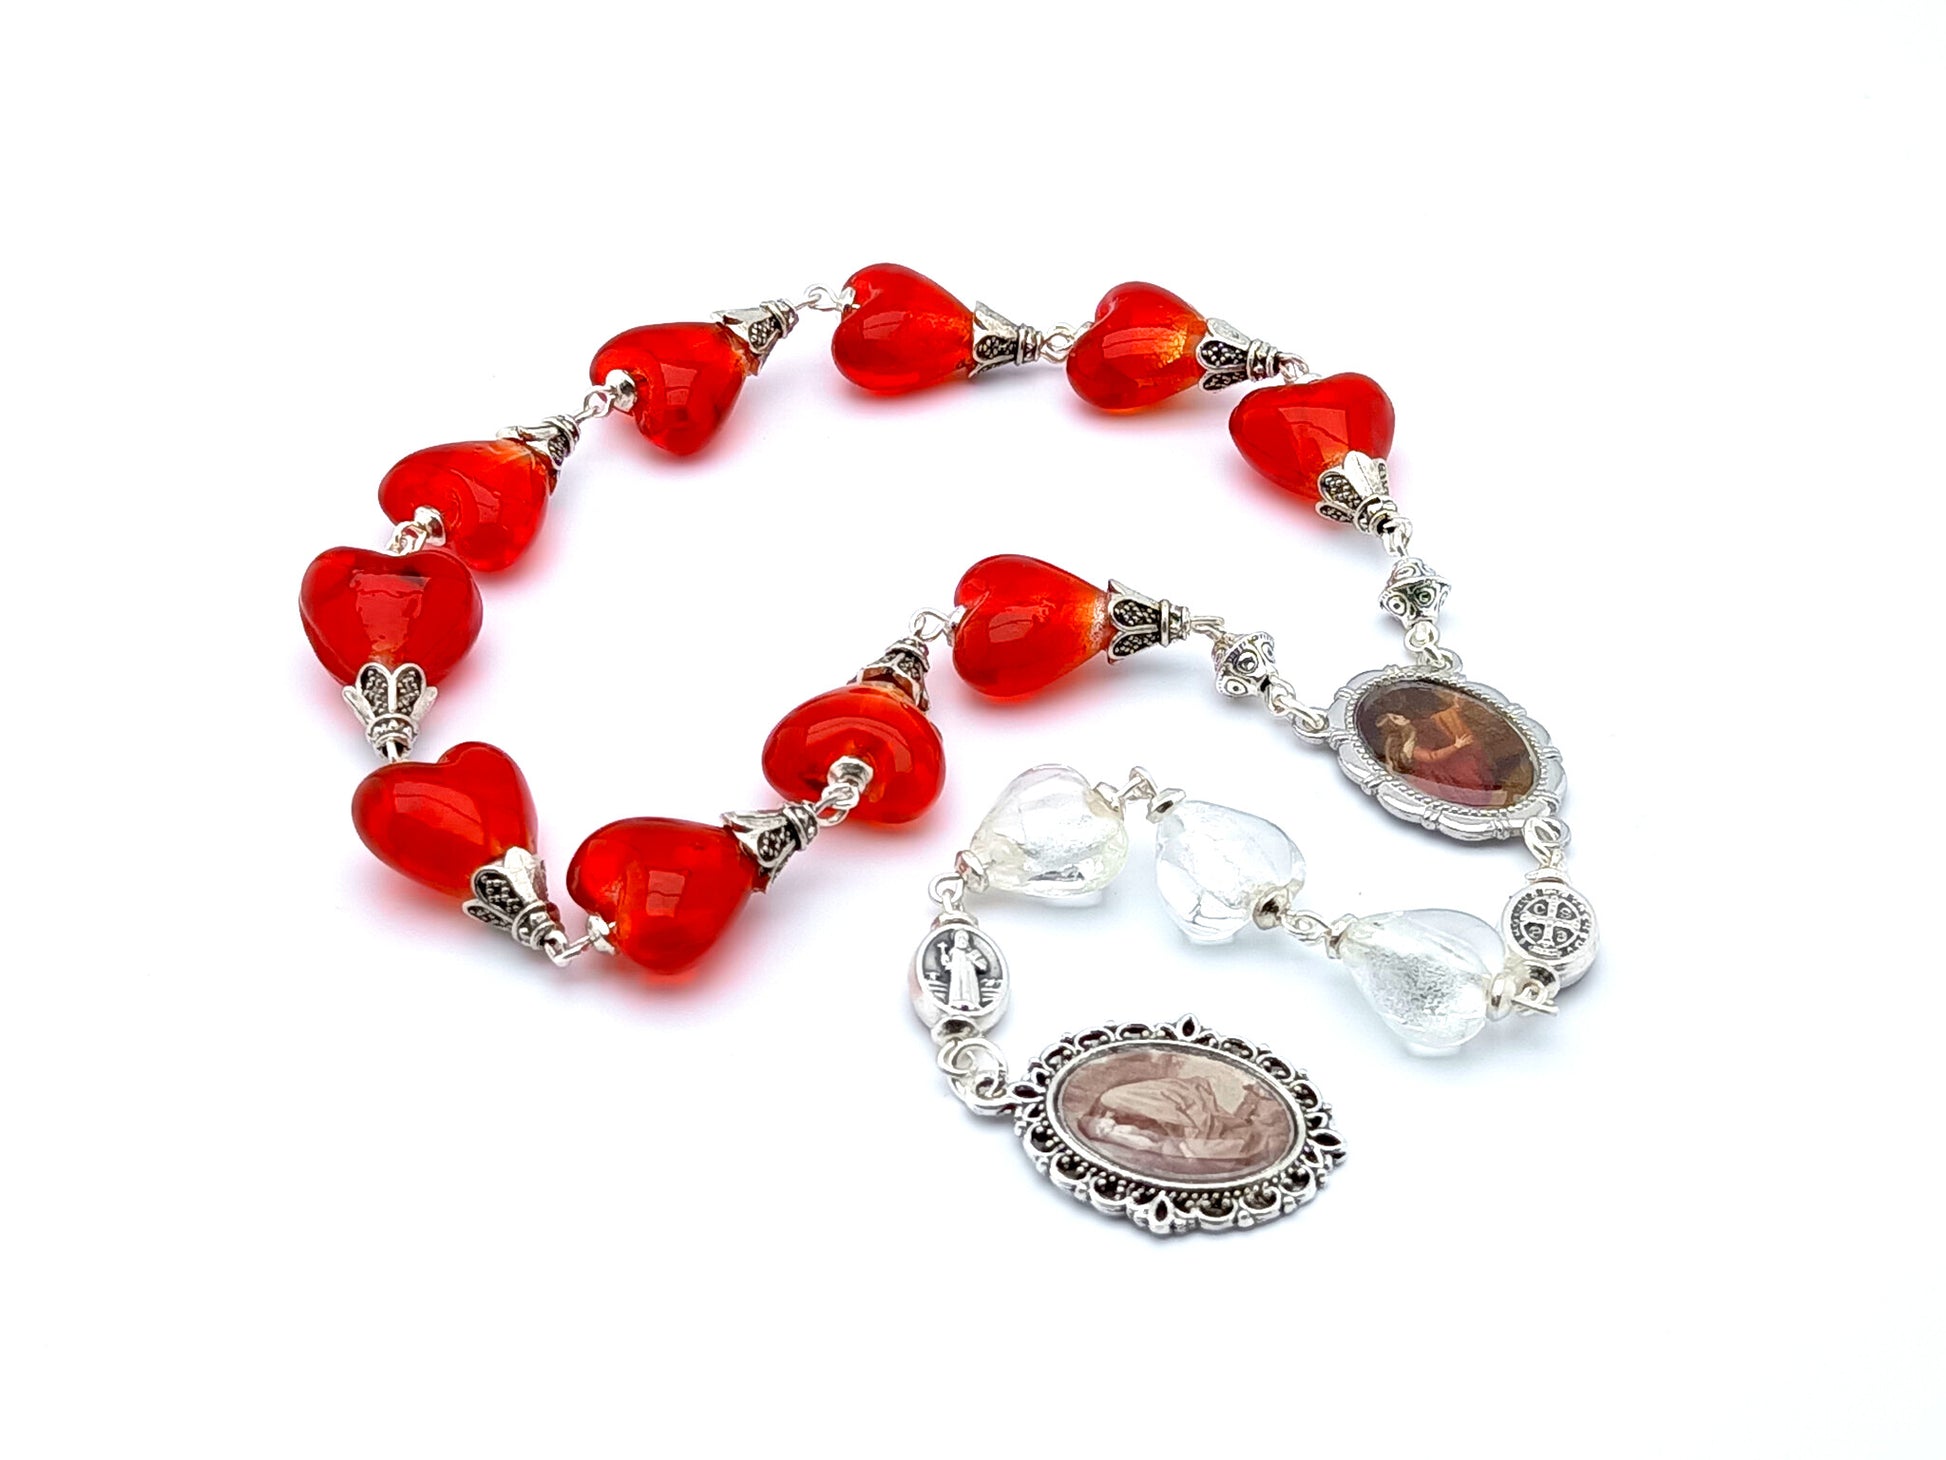 Red Glass Heart Beads